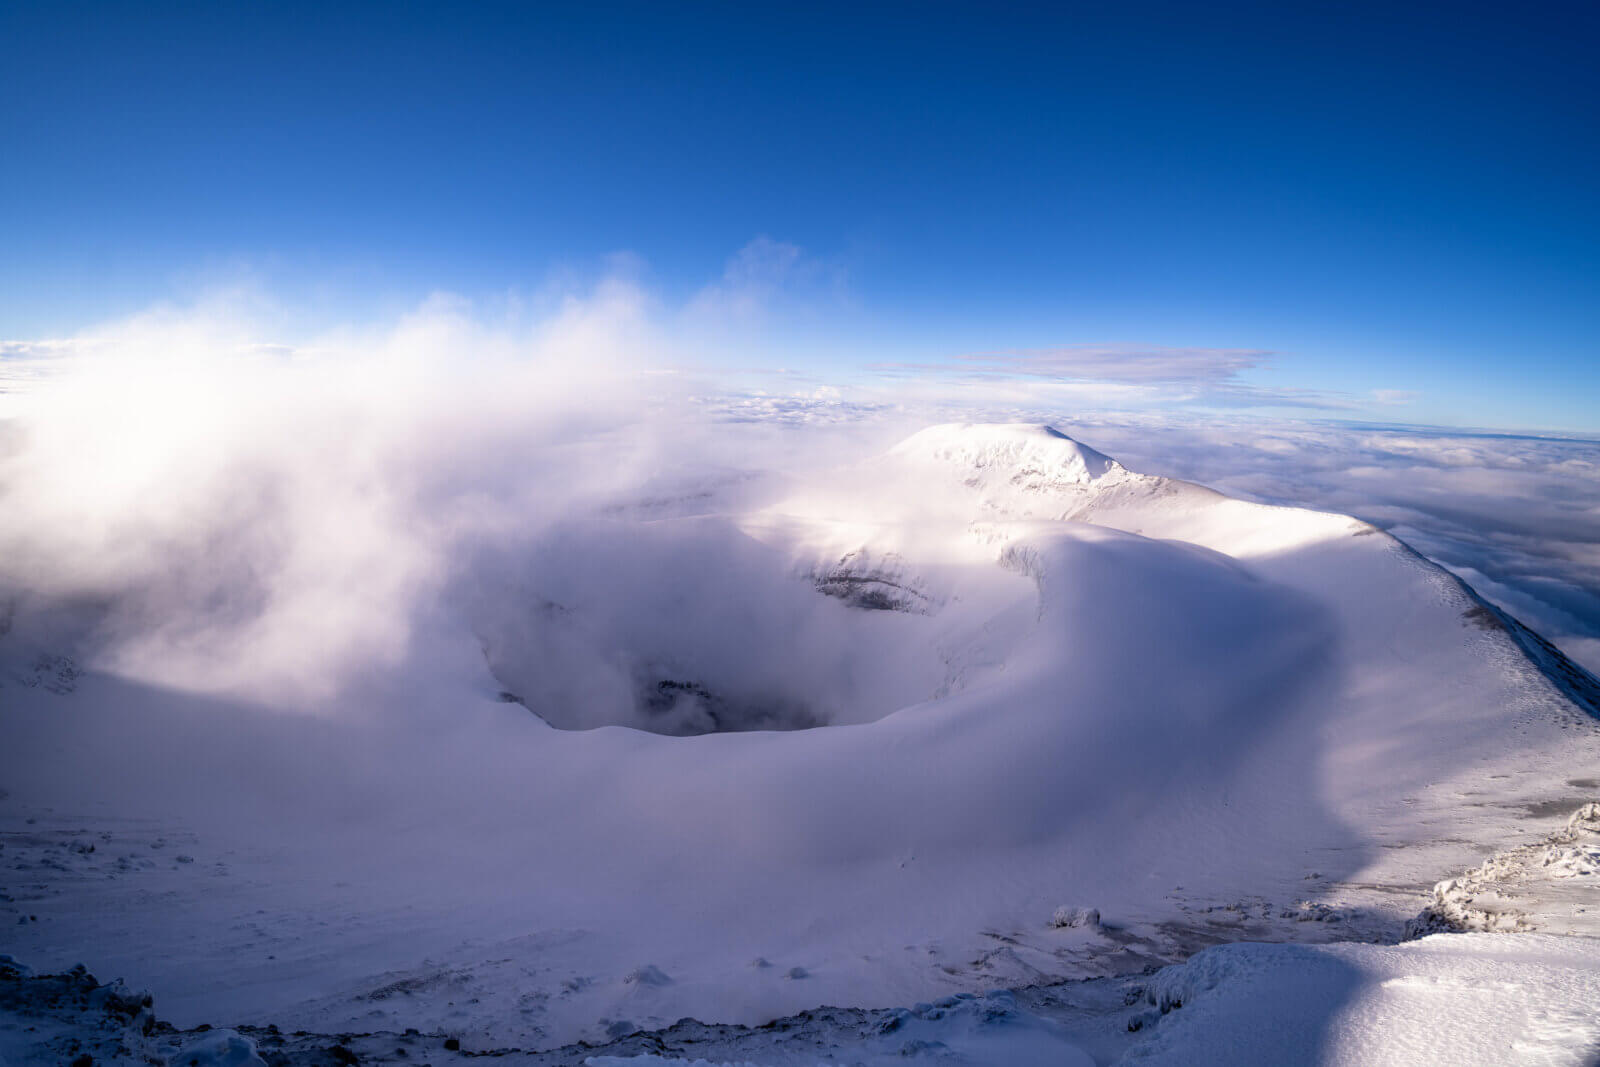 The summit of Cotopaxi volcano shrouded in clouds and mist during a guided Cotopaxi Expedition with Alpenglow Expeditions.